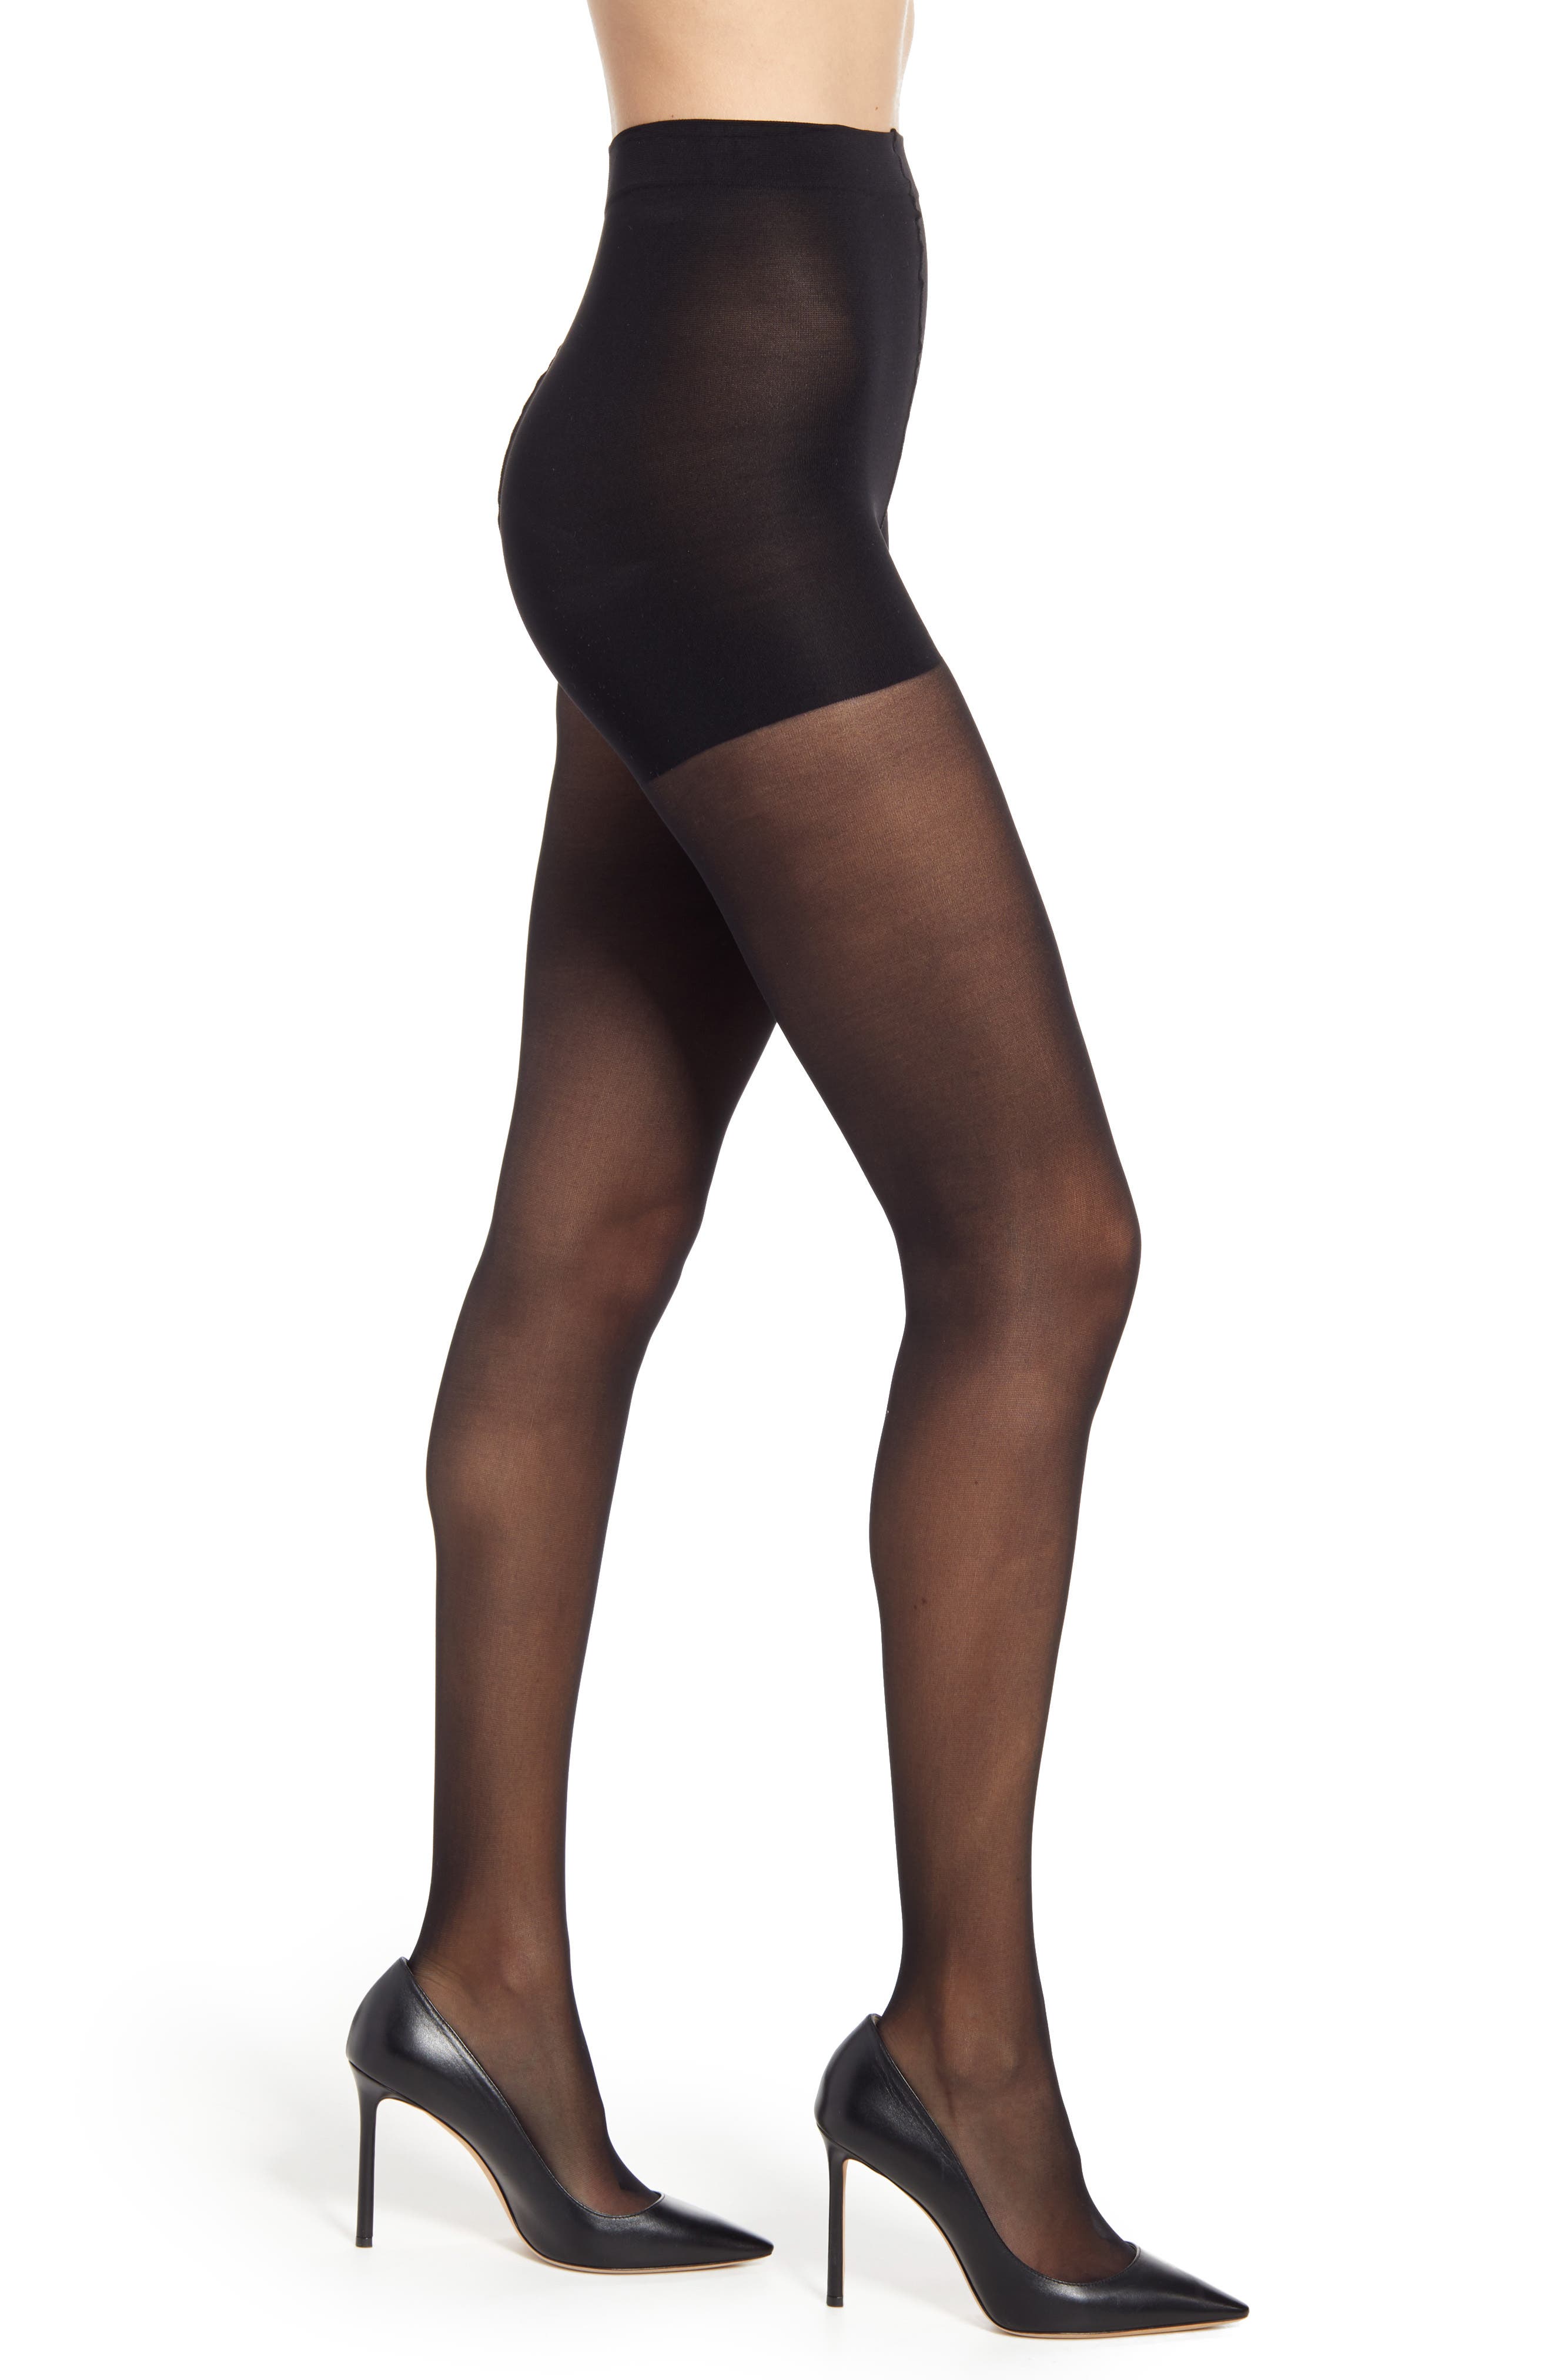 Swedish Stockings Moa Control Top Semi Opaque Tights in Sand at Nordstrom